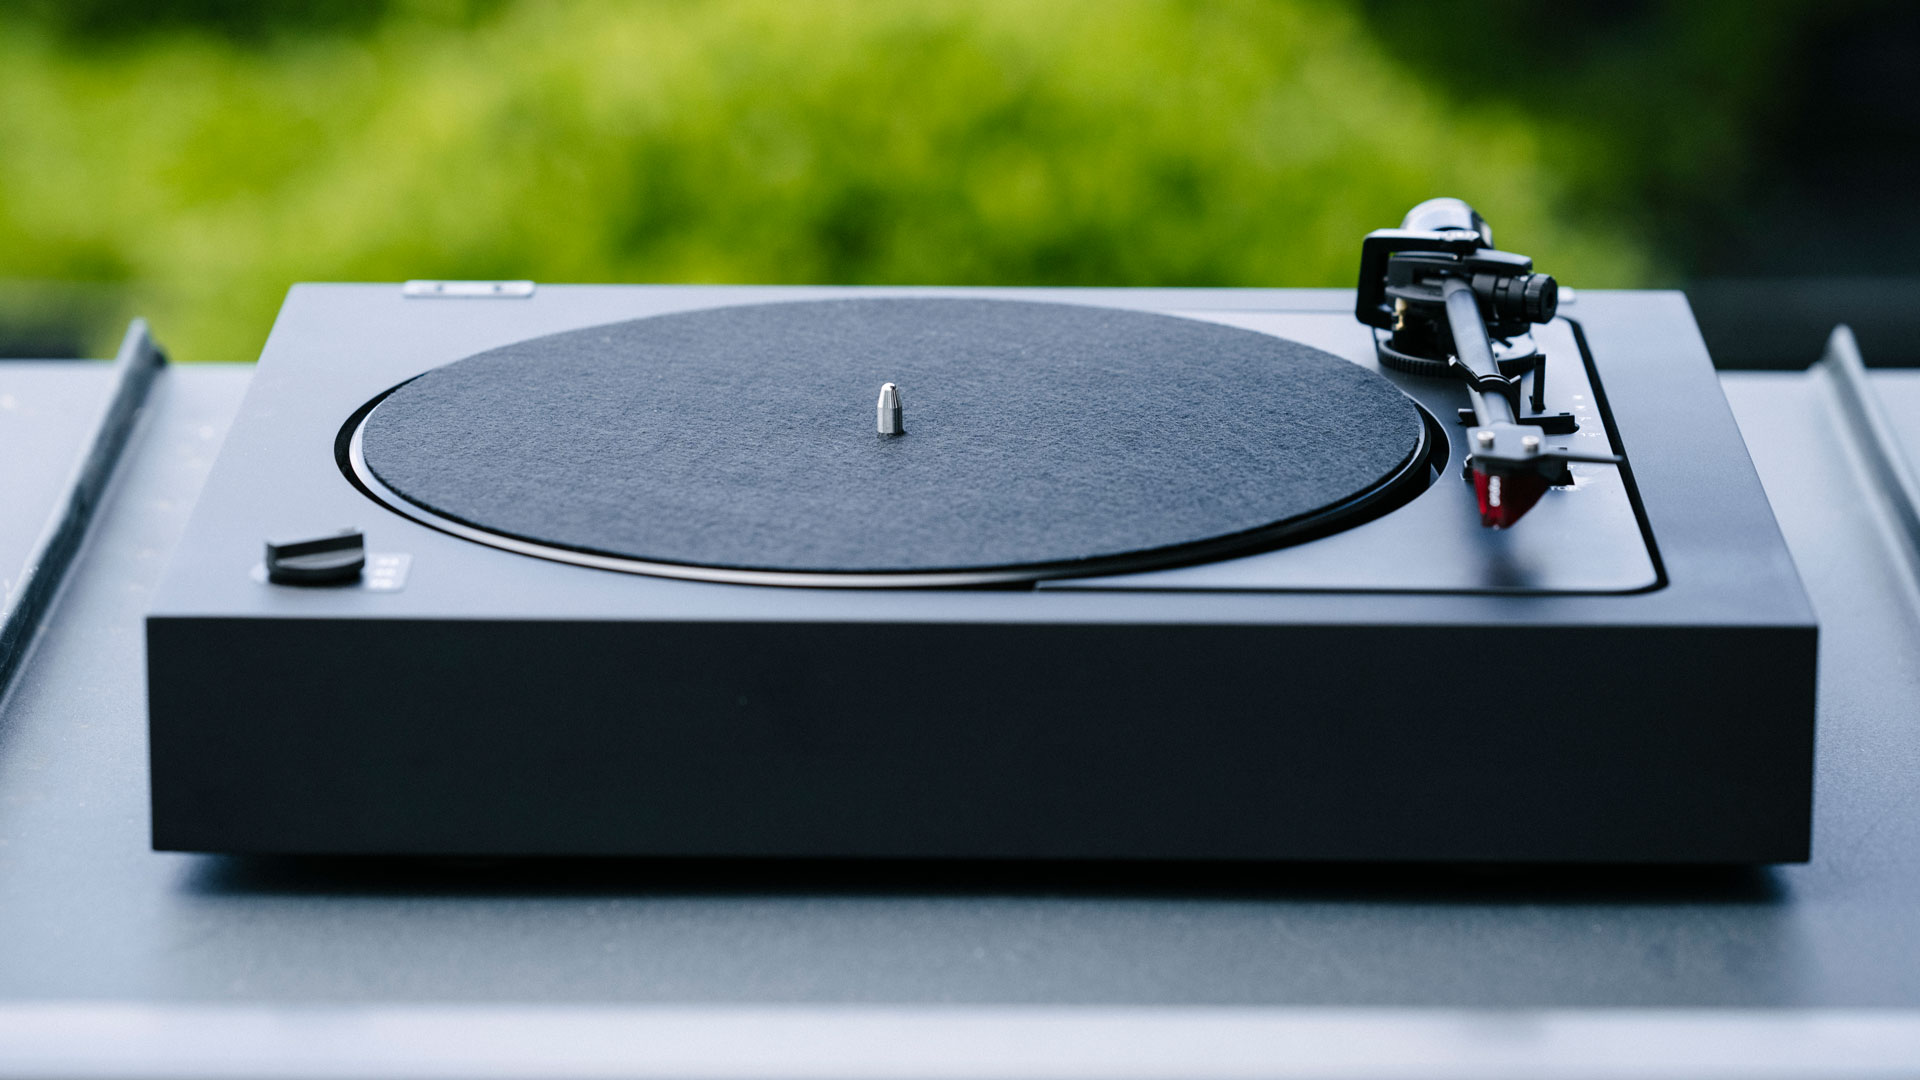 The new Pro-Ject Automat A2 (Image Credit: Pro-Ject)